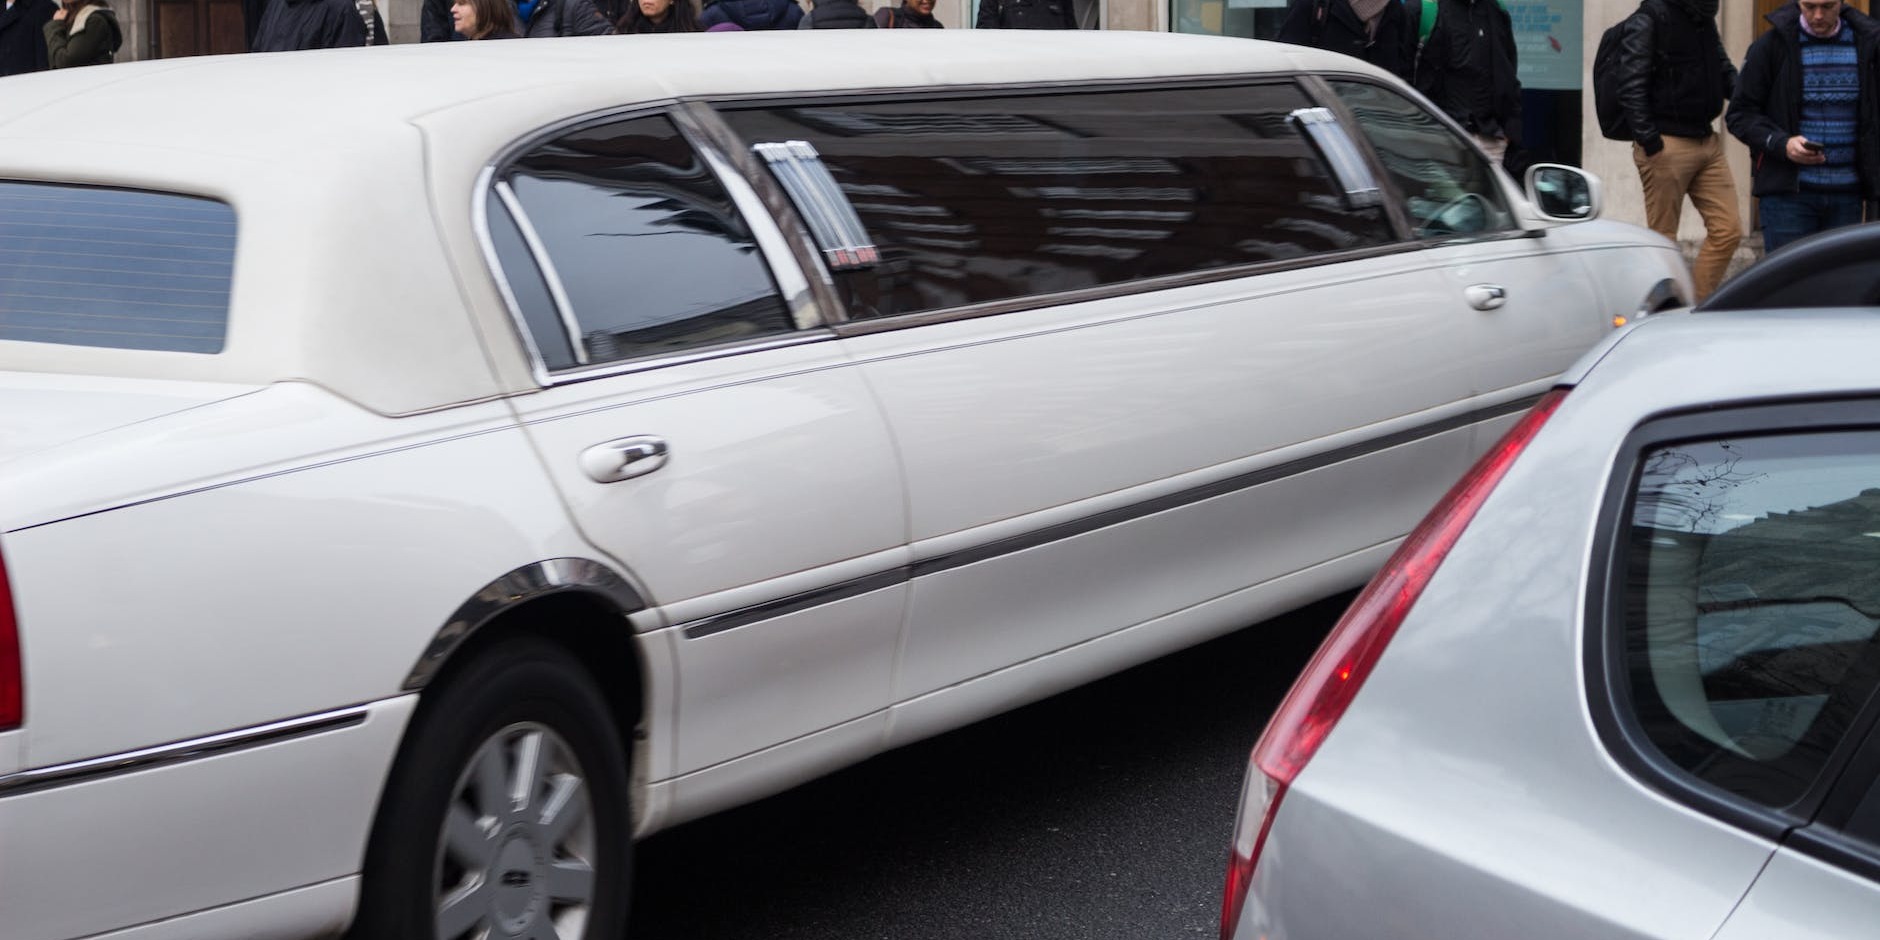 Top Tips for Booking a Luxury Limo in the UK